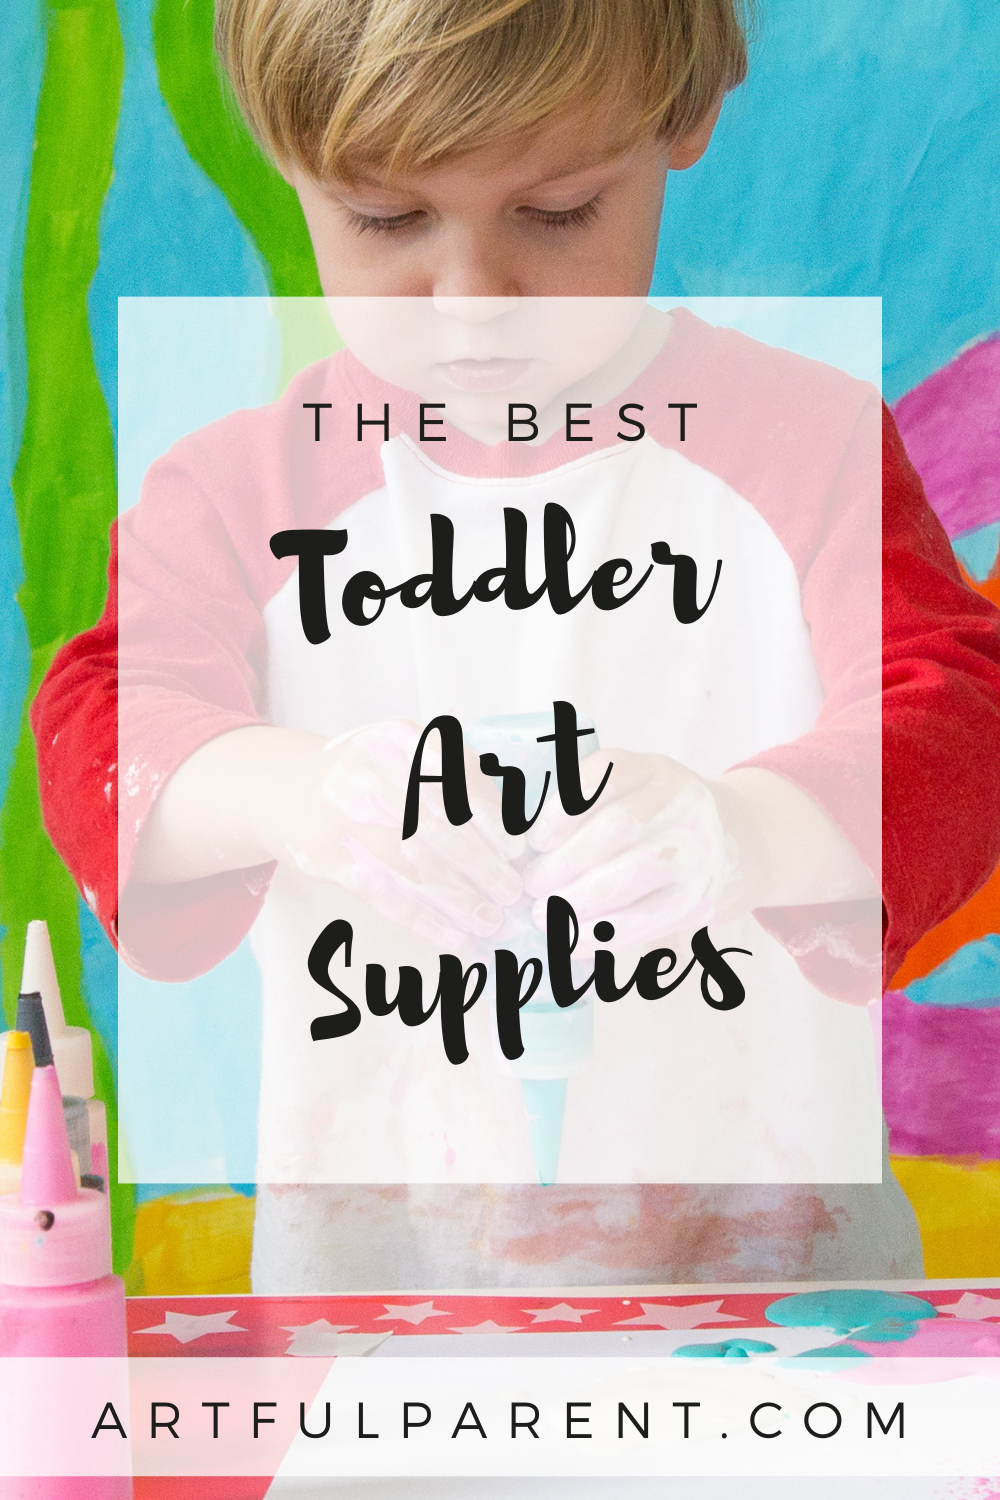 Arts and Crafts Supplies Kit for Kids - Boys and Girls Age 4 5 6 7 8 Years  Old - Toddler Art Set Activity Materials - Great for Preschool and